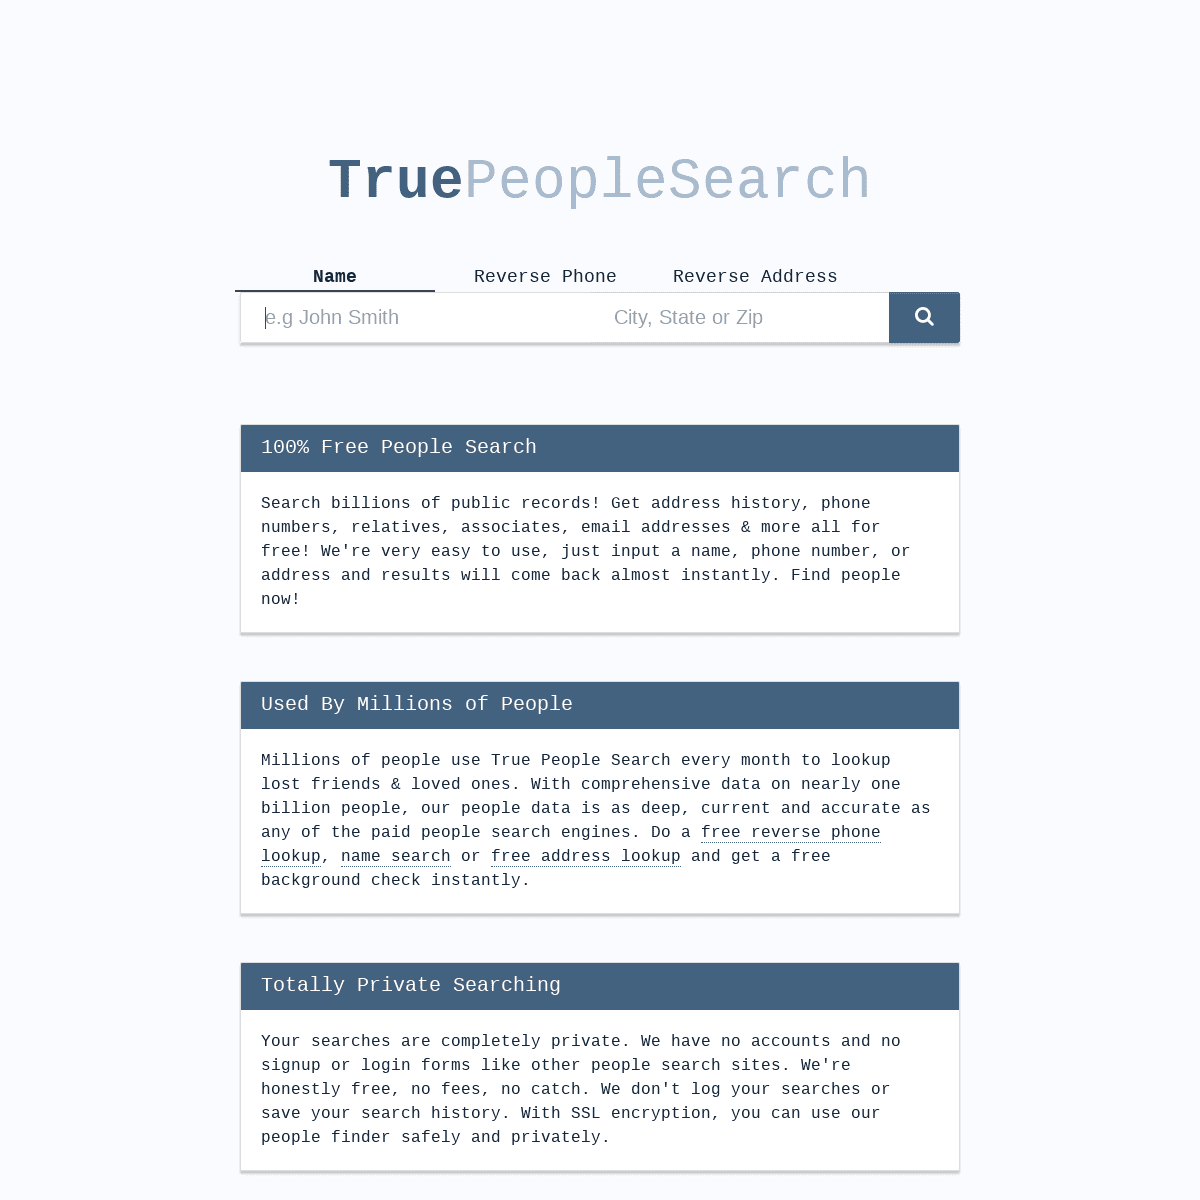 TruePeopleSearch: Free People Search